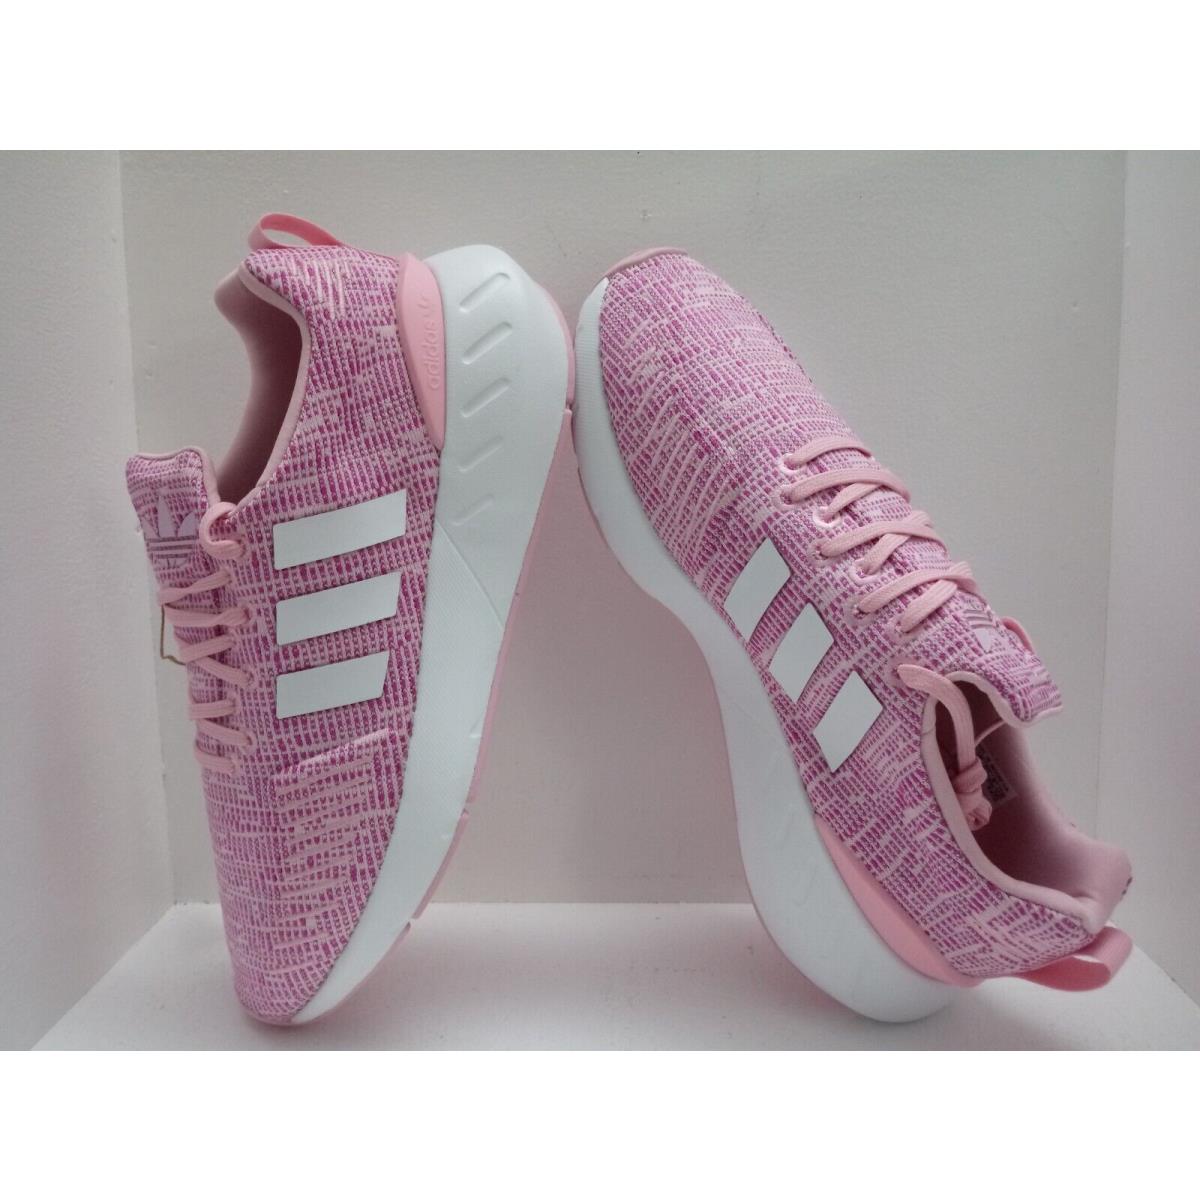 Adidas shoes  - PINK/WHITE 5